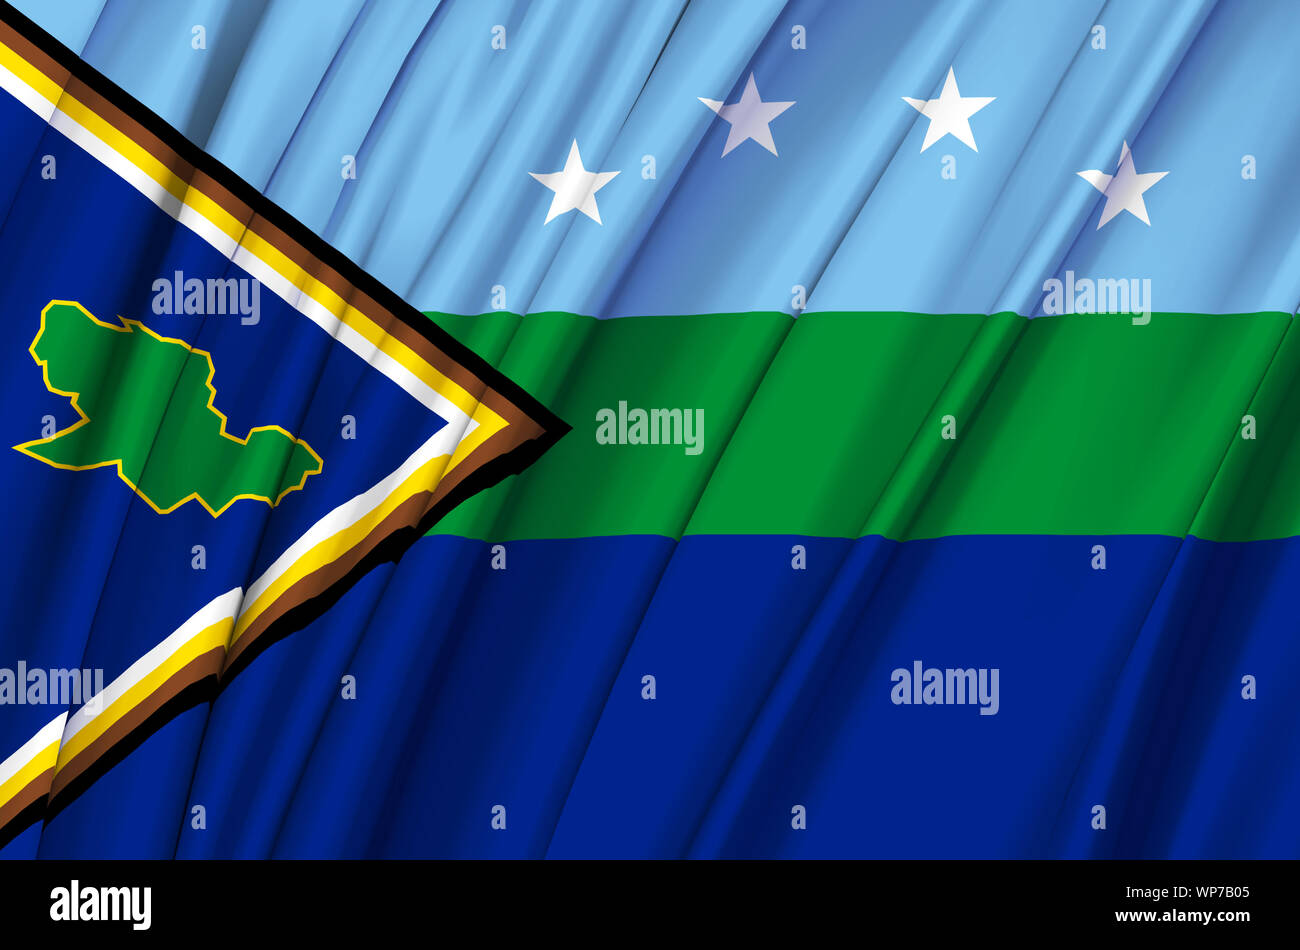 Delta Amacuro waving flag illustration. Regions of Venezuela. Perfect for background and texture usage. Stock Photo